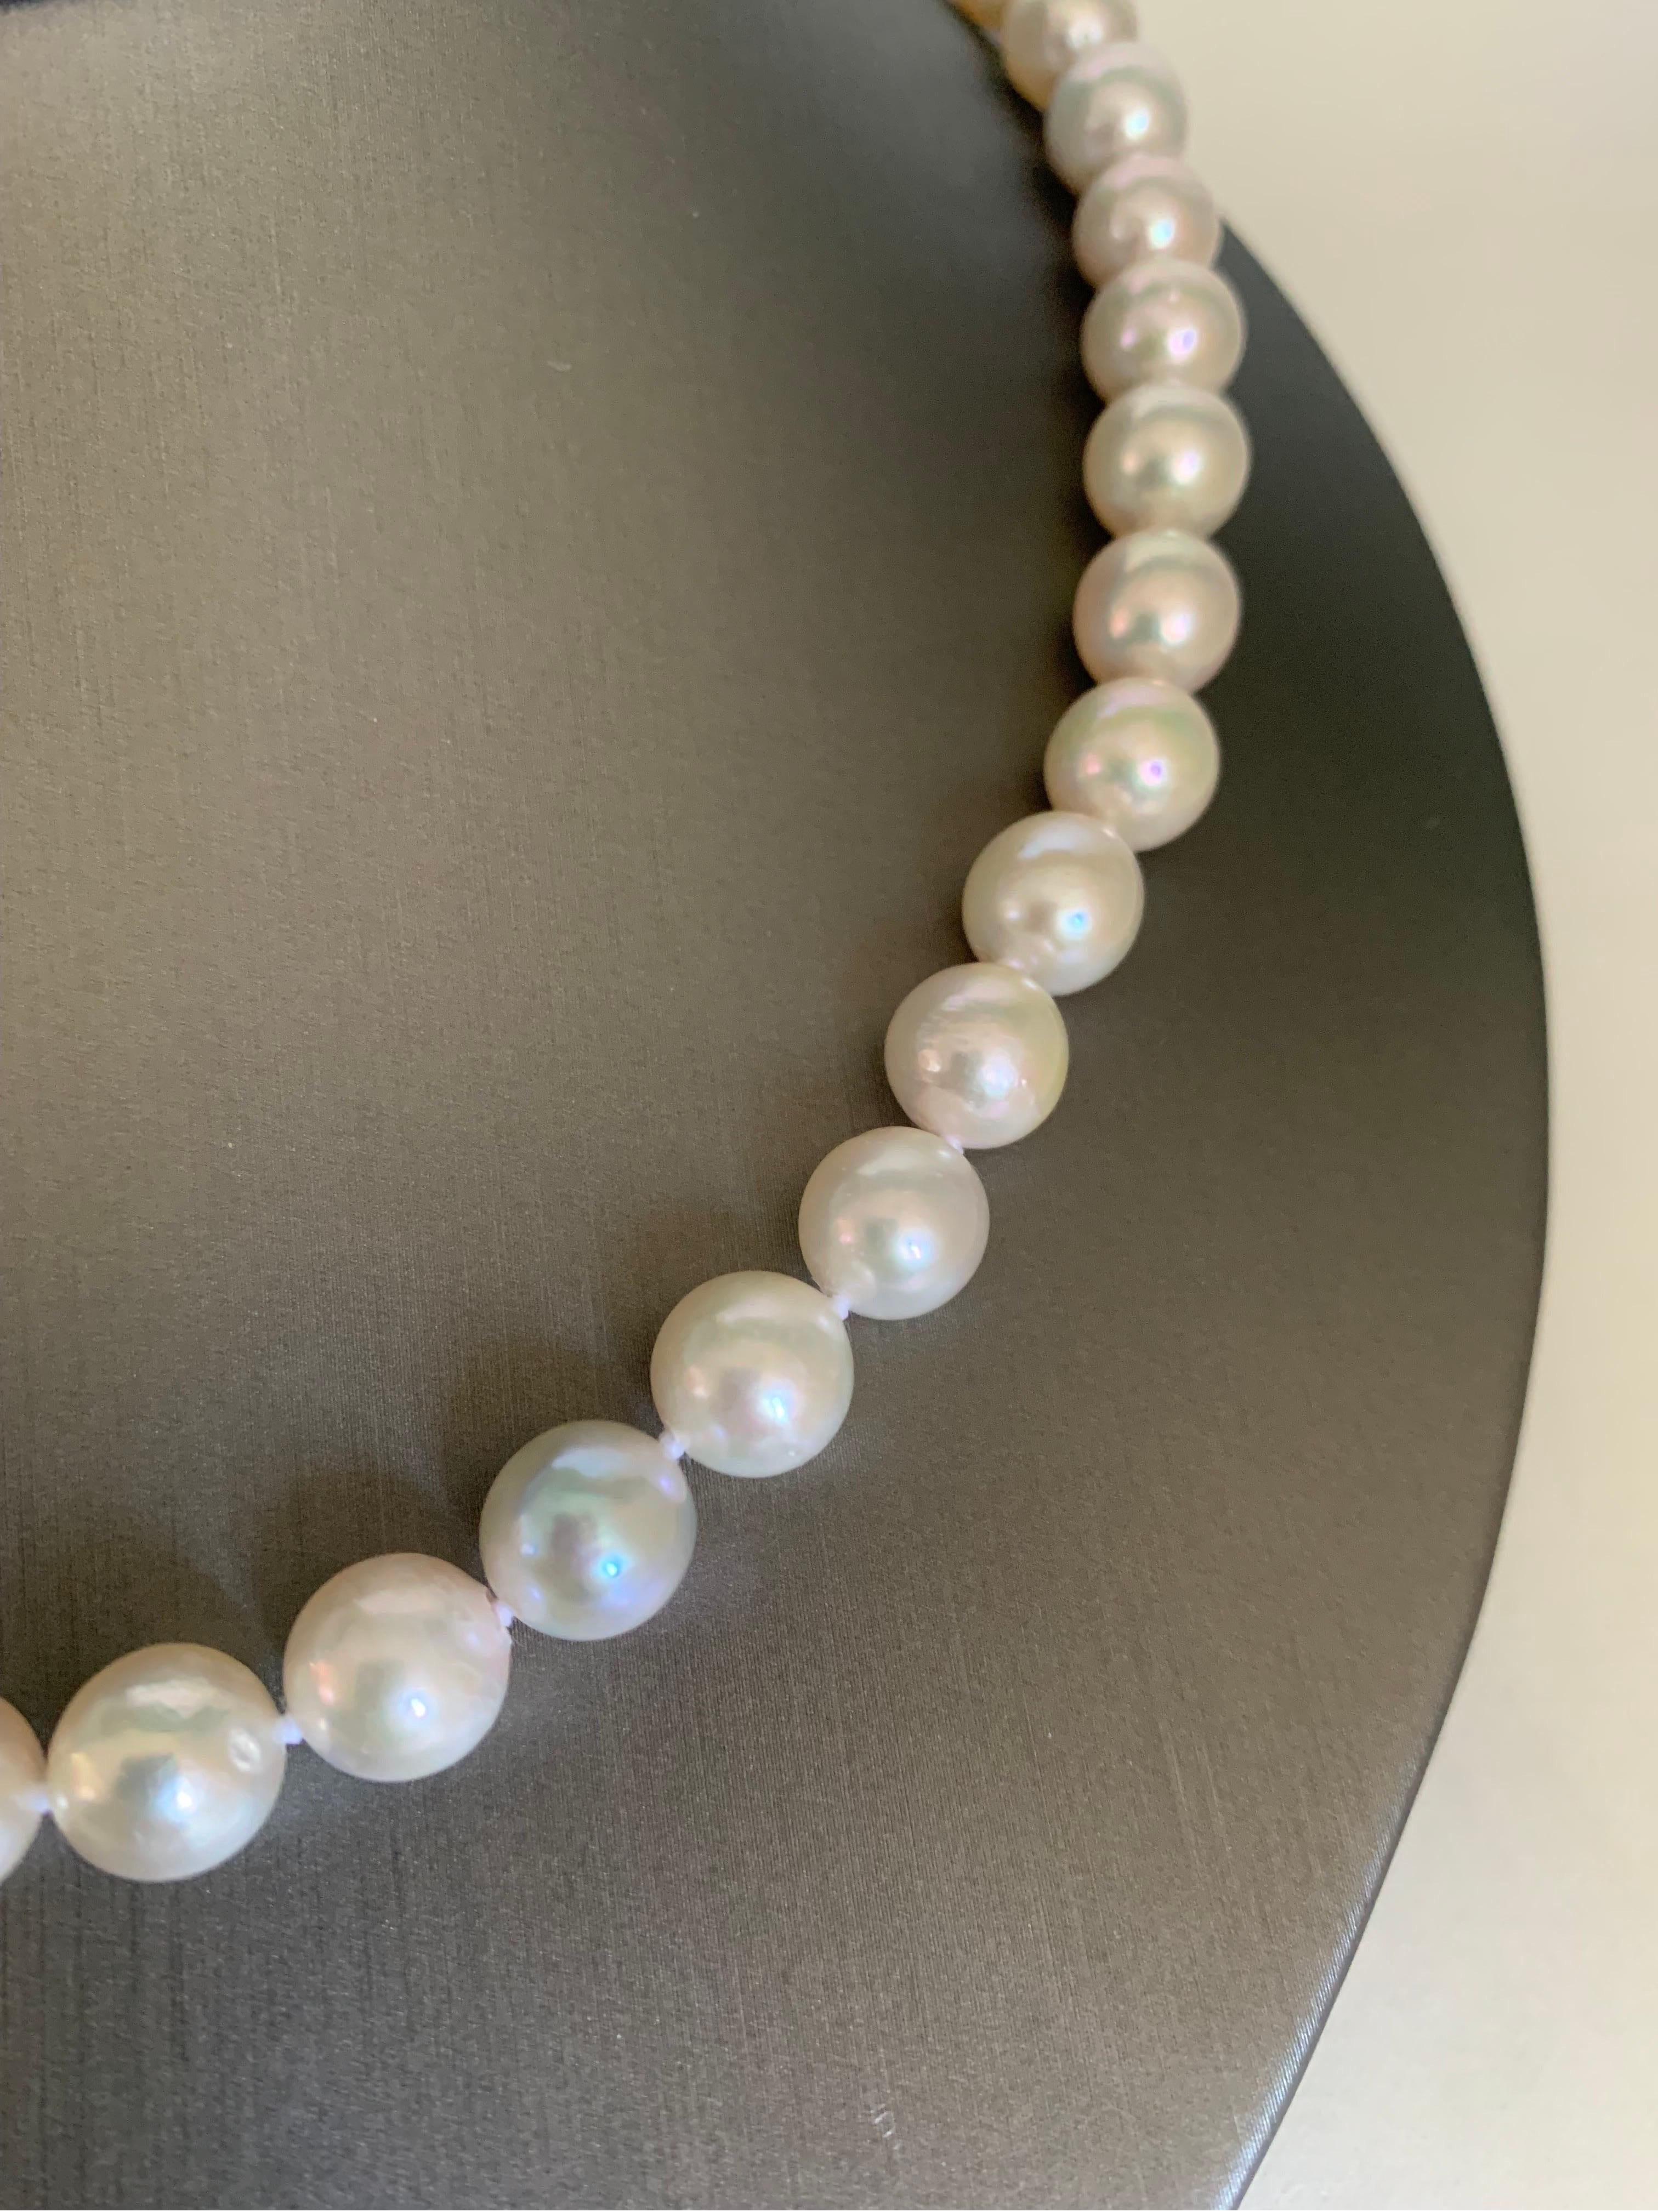 Elevate your look with a timeless pearl necklace. This 17-18 inches in length strand necklace is fully knotted and hand strung with matching silk cord. The necklace comprises 44 lustrous Akoya pearls measuring 9mm and closure is 14K white gold